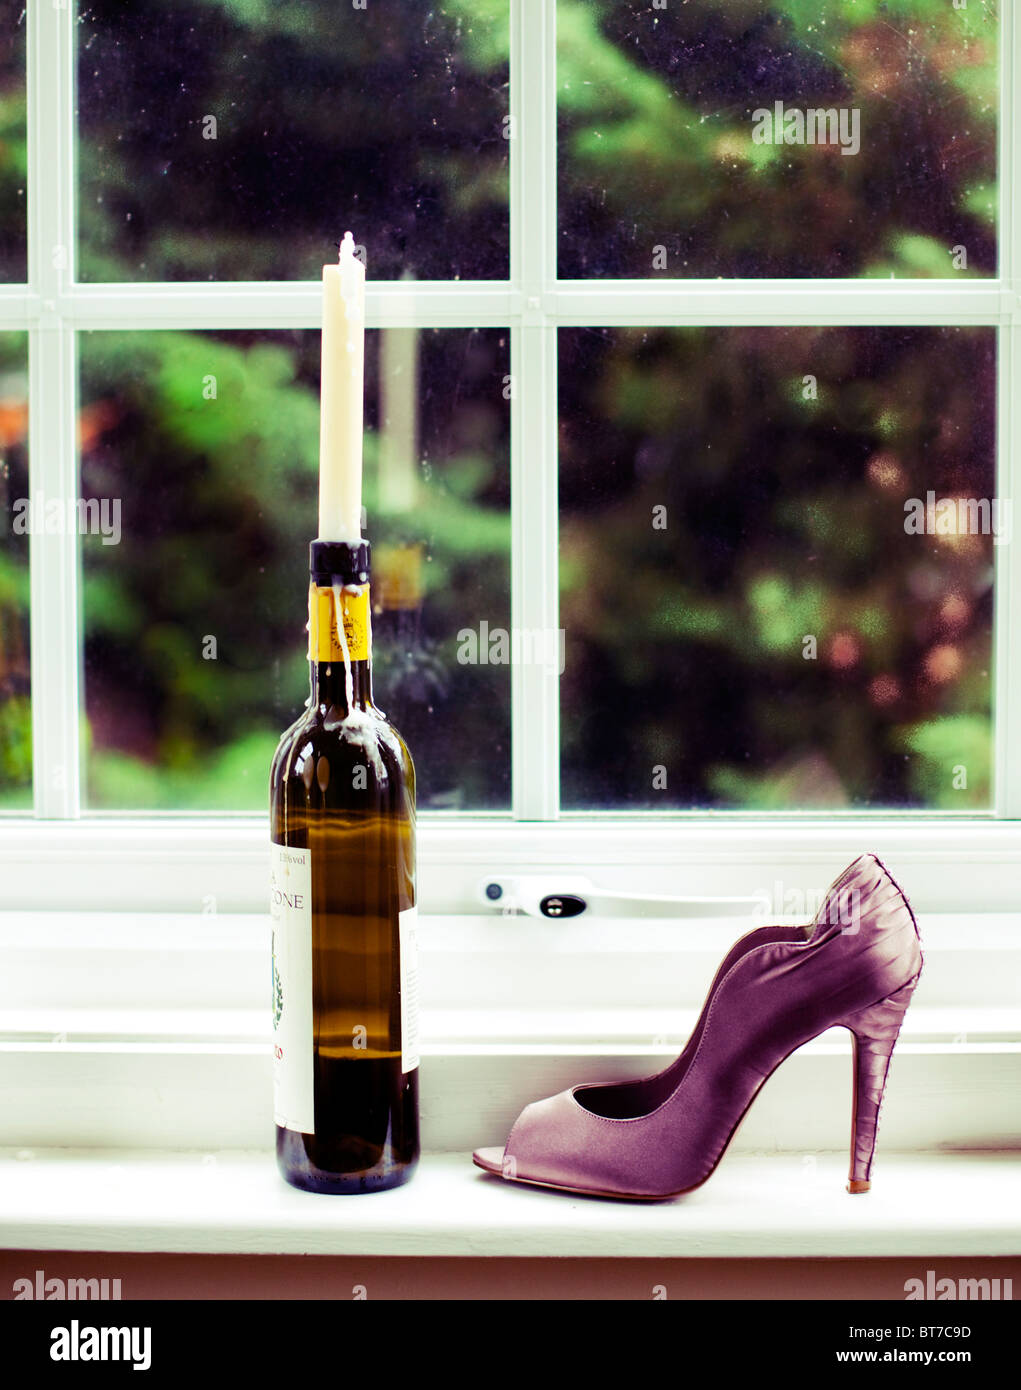 Women's shoe and bottle with candle on window sill, UK Stock Photo